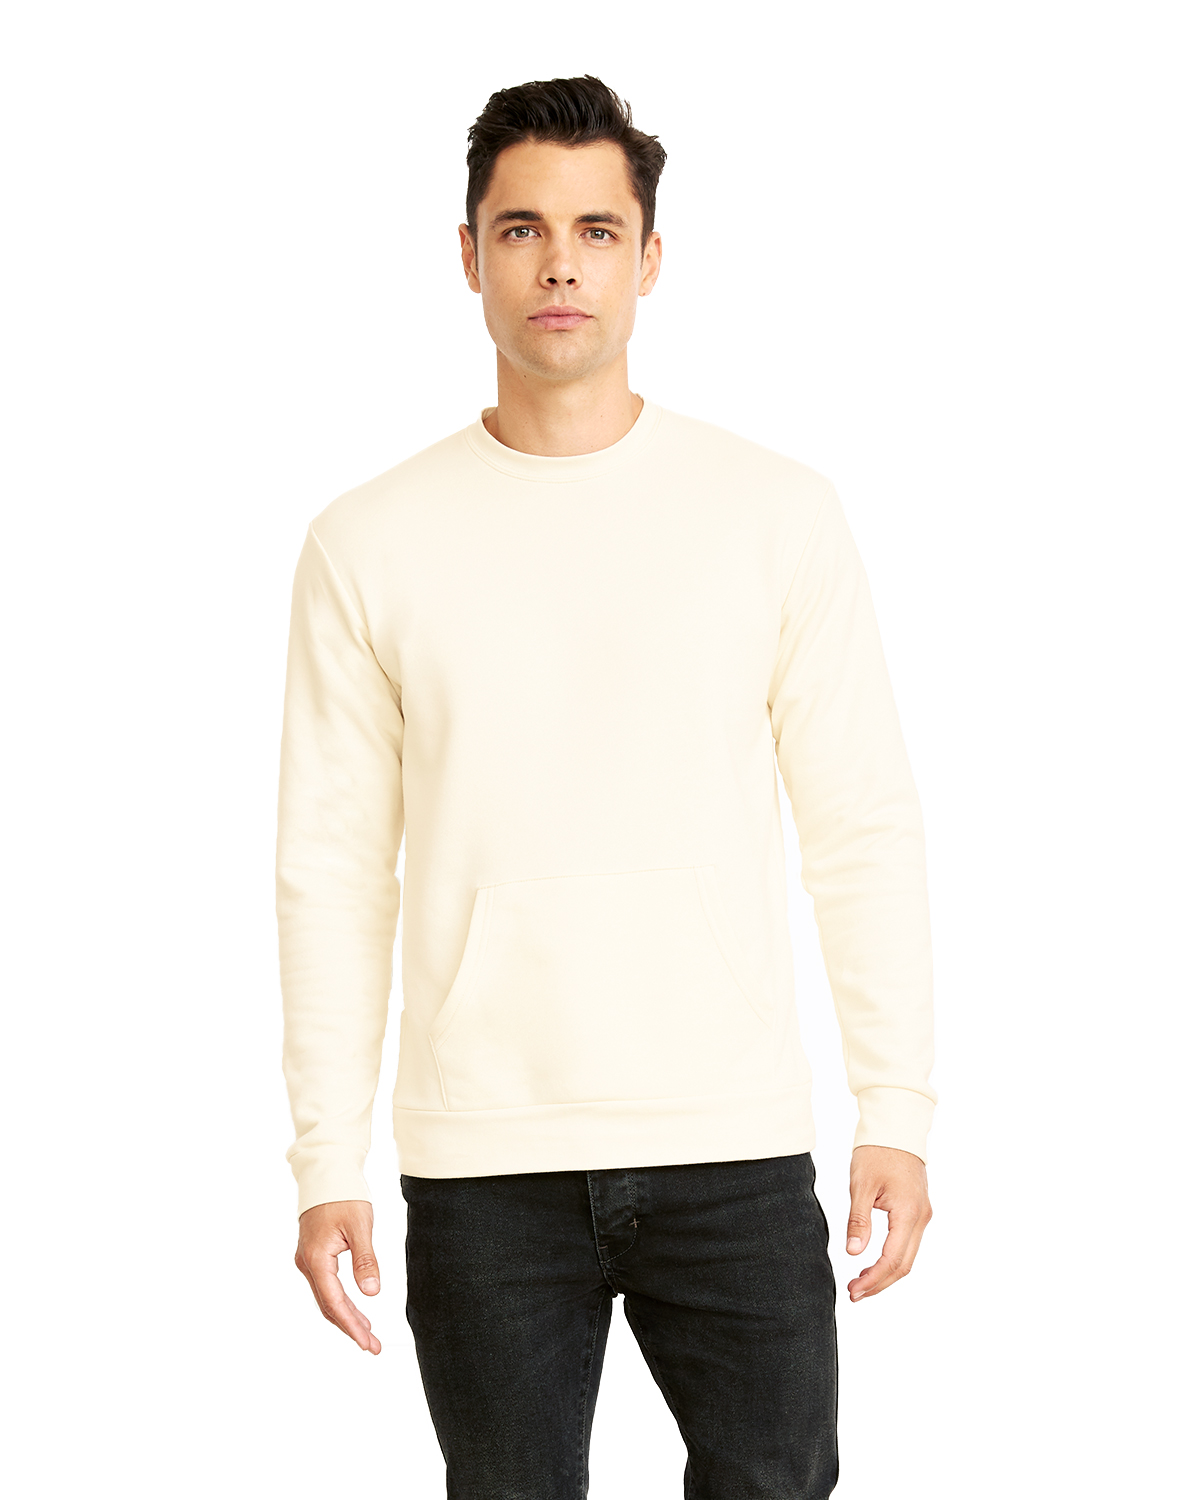 Next Level 9001 Unisex Long-Sleeve Crew with Pocket - Natural - S